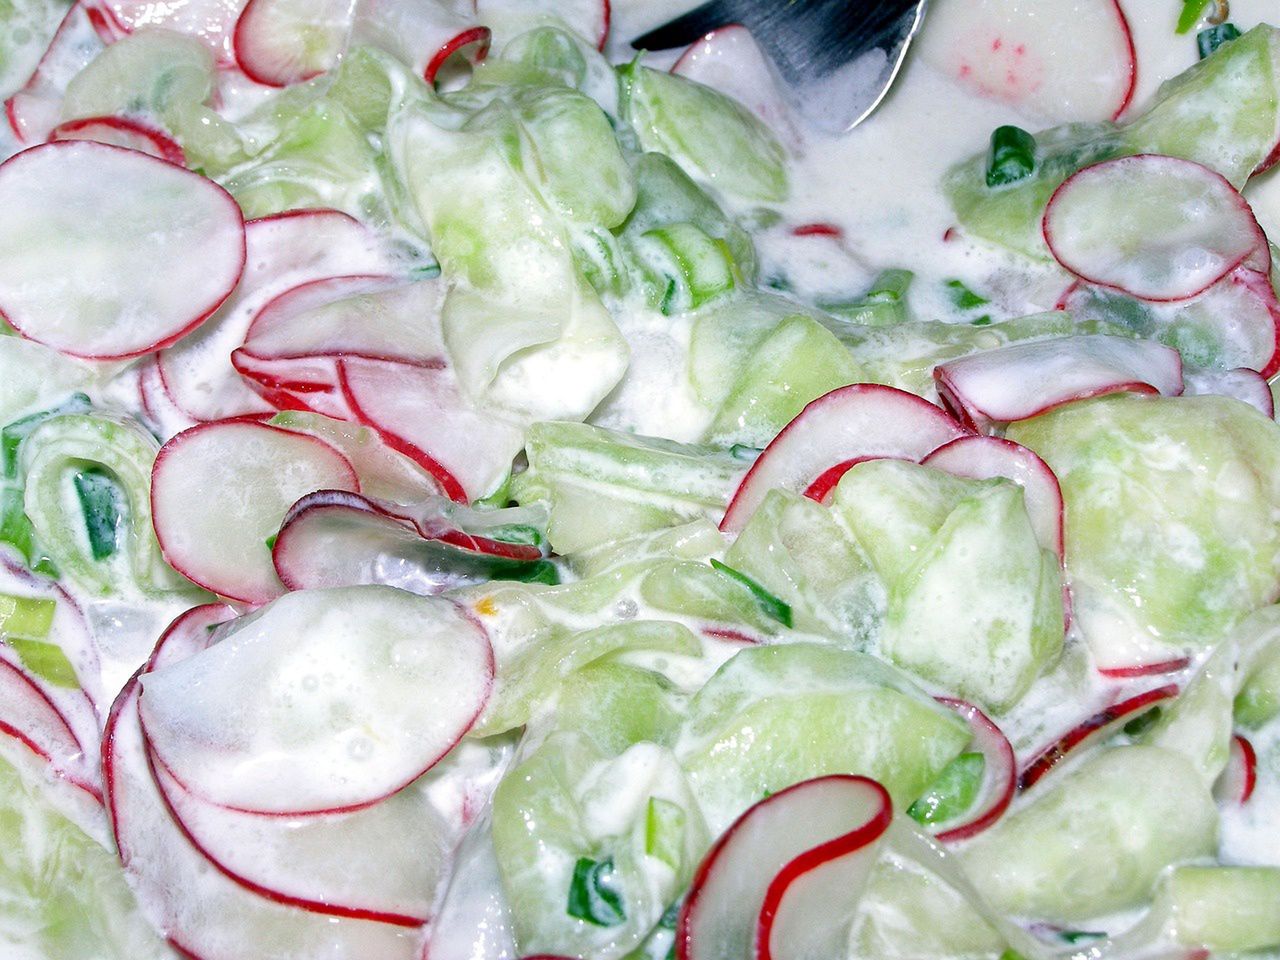 What to do to make the cucumber salad watery?